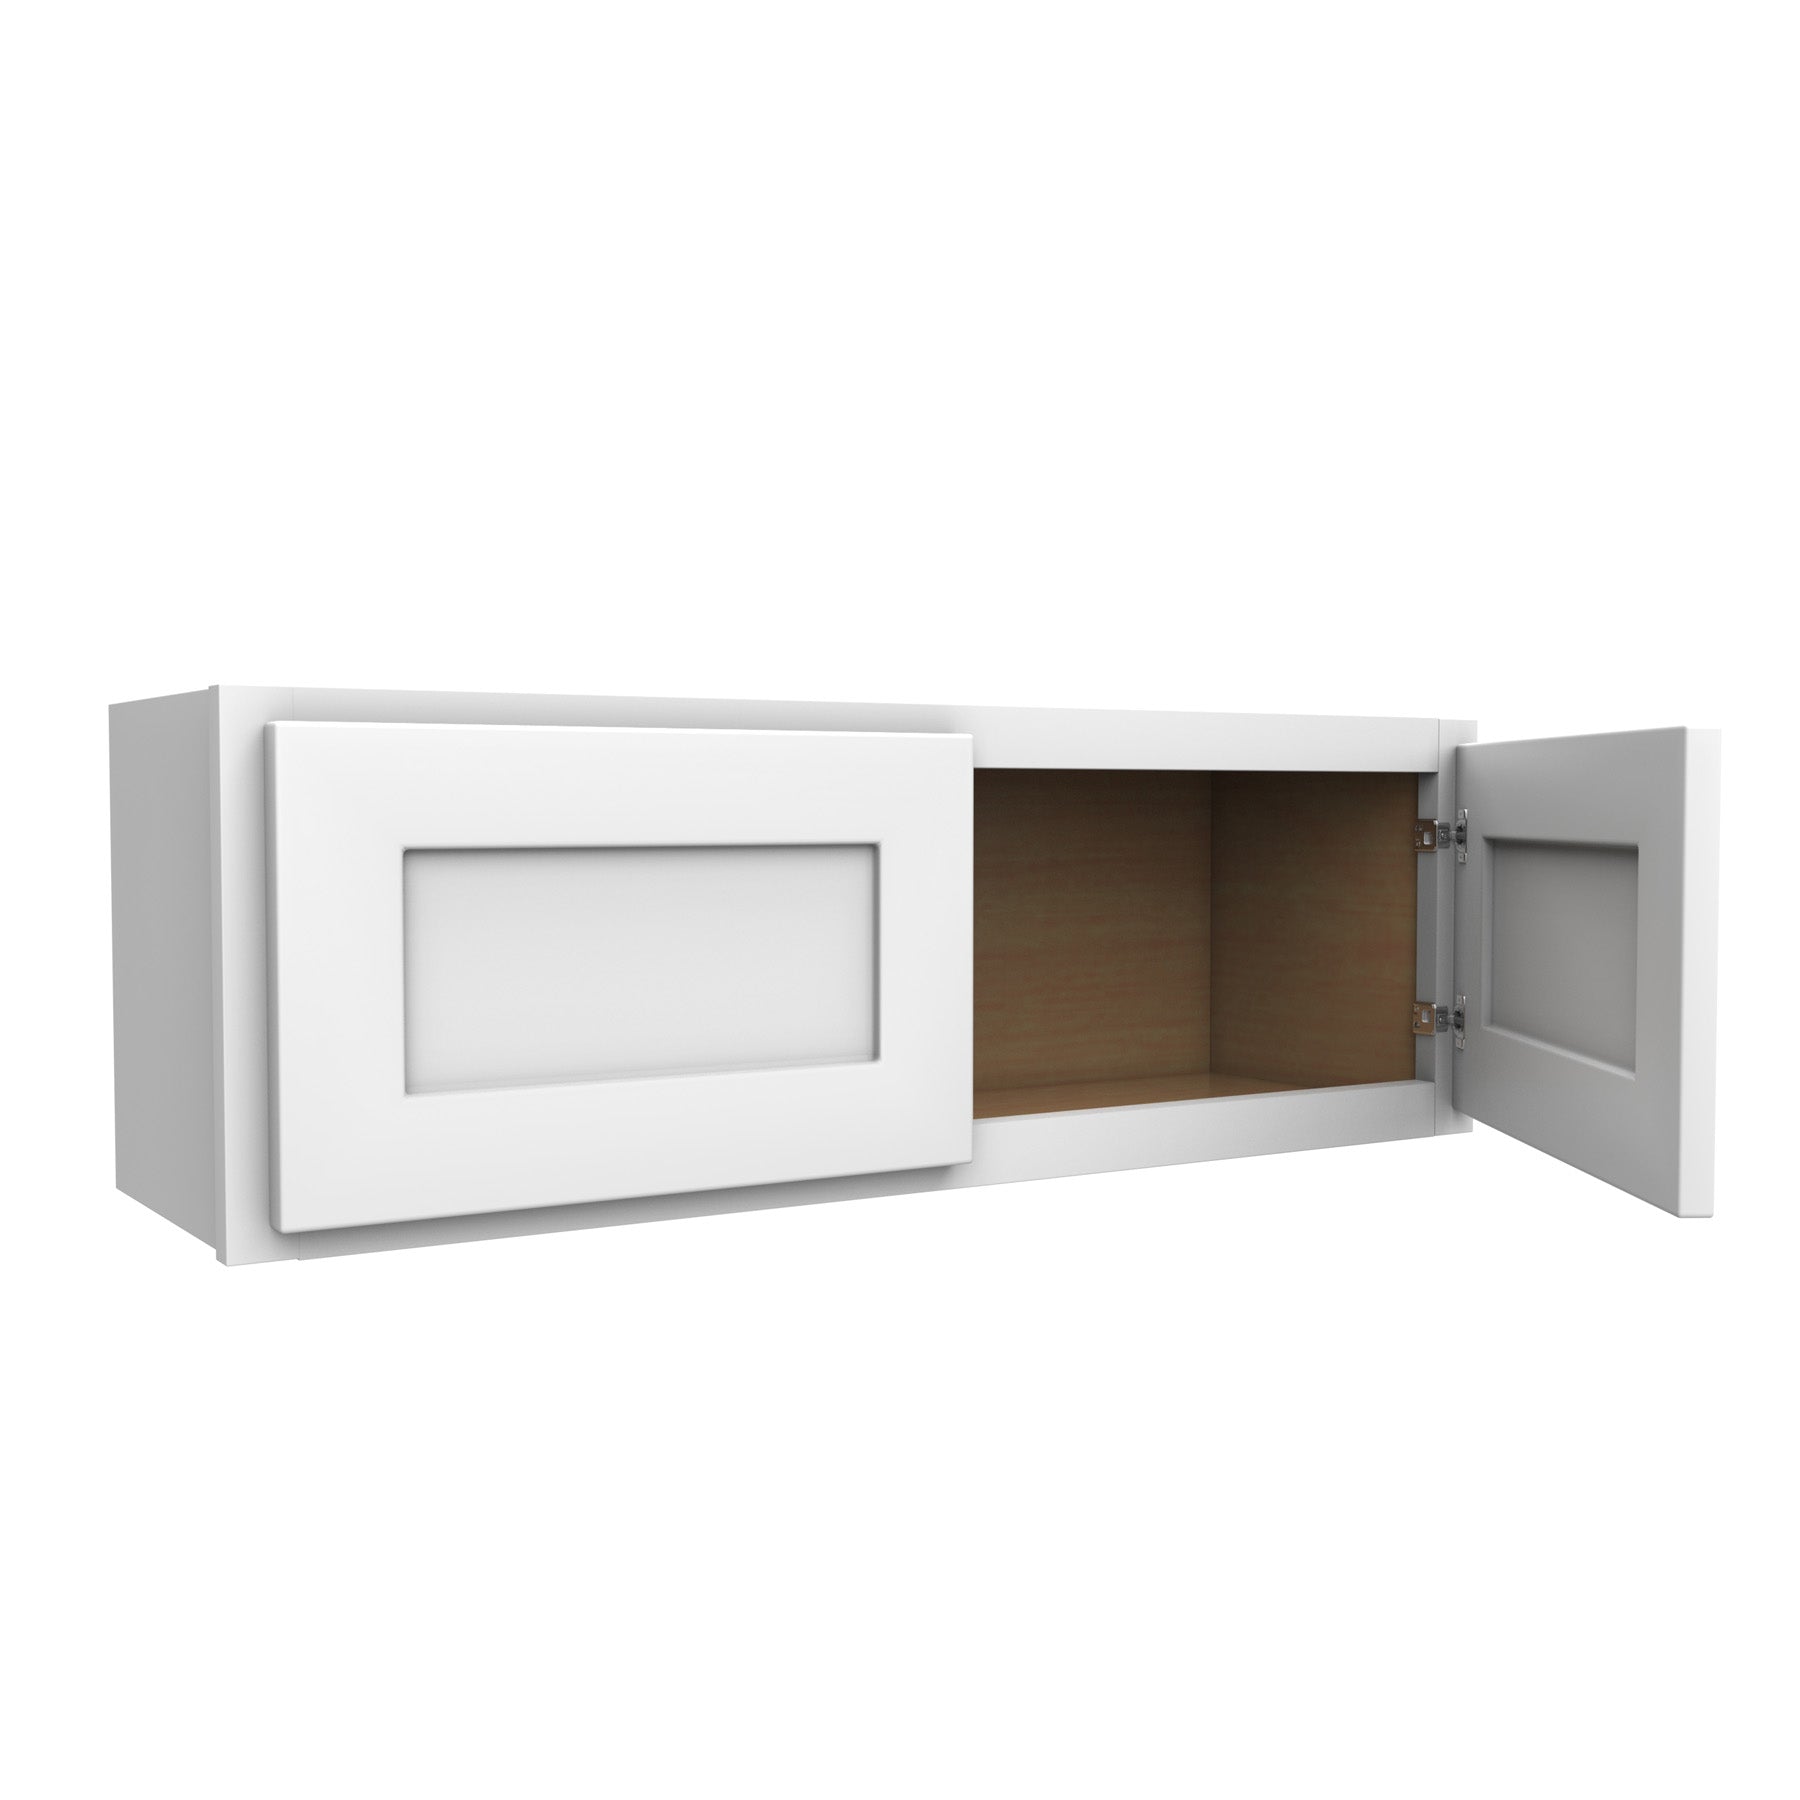 12 Inch High Double Door Wall Cabinet - Luxor White Shaker - Ready To Assemble, 36"W x 12"H x 12"D